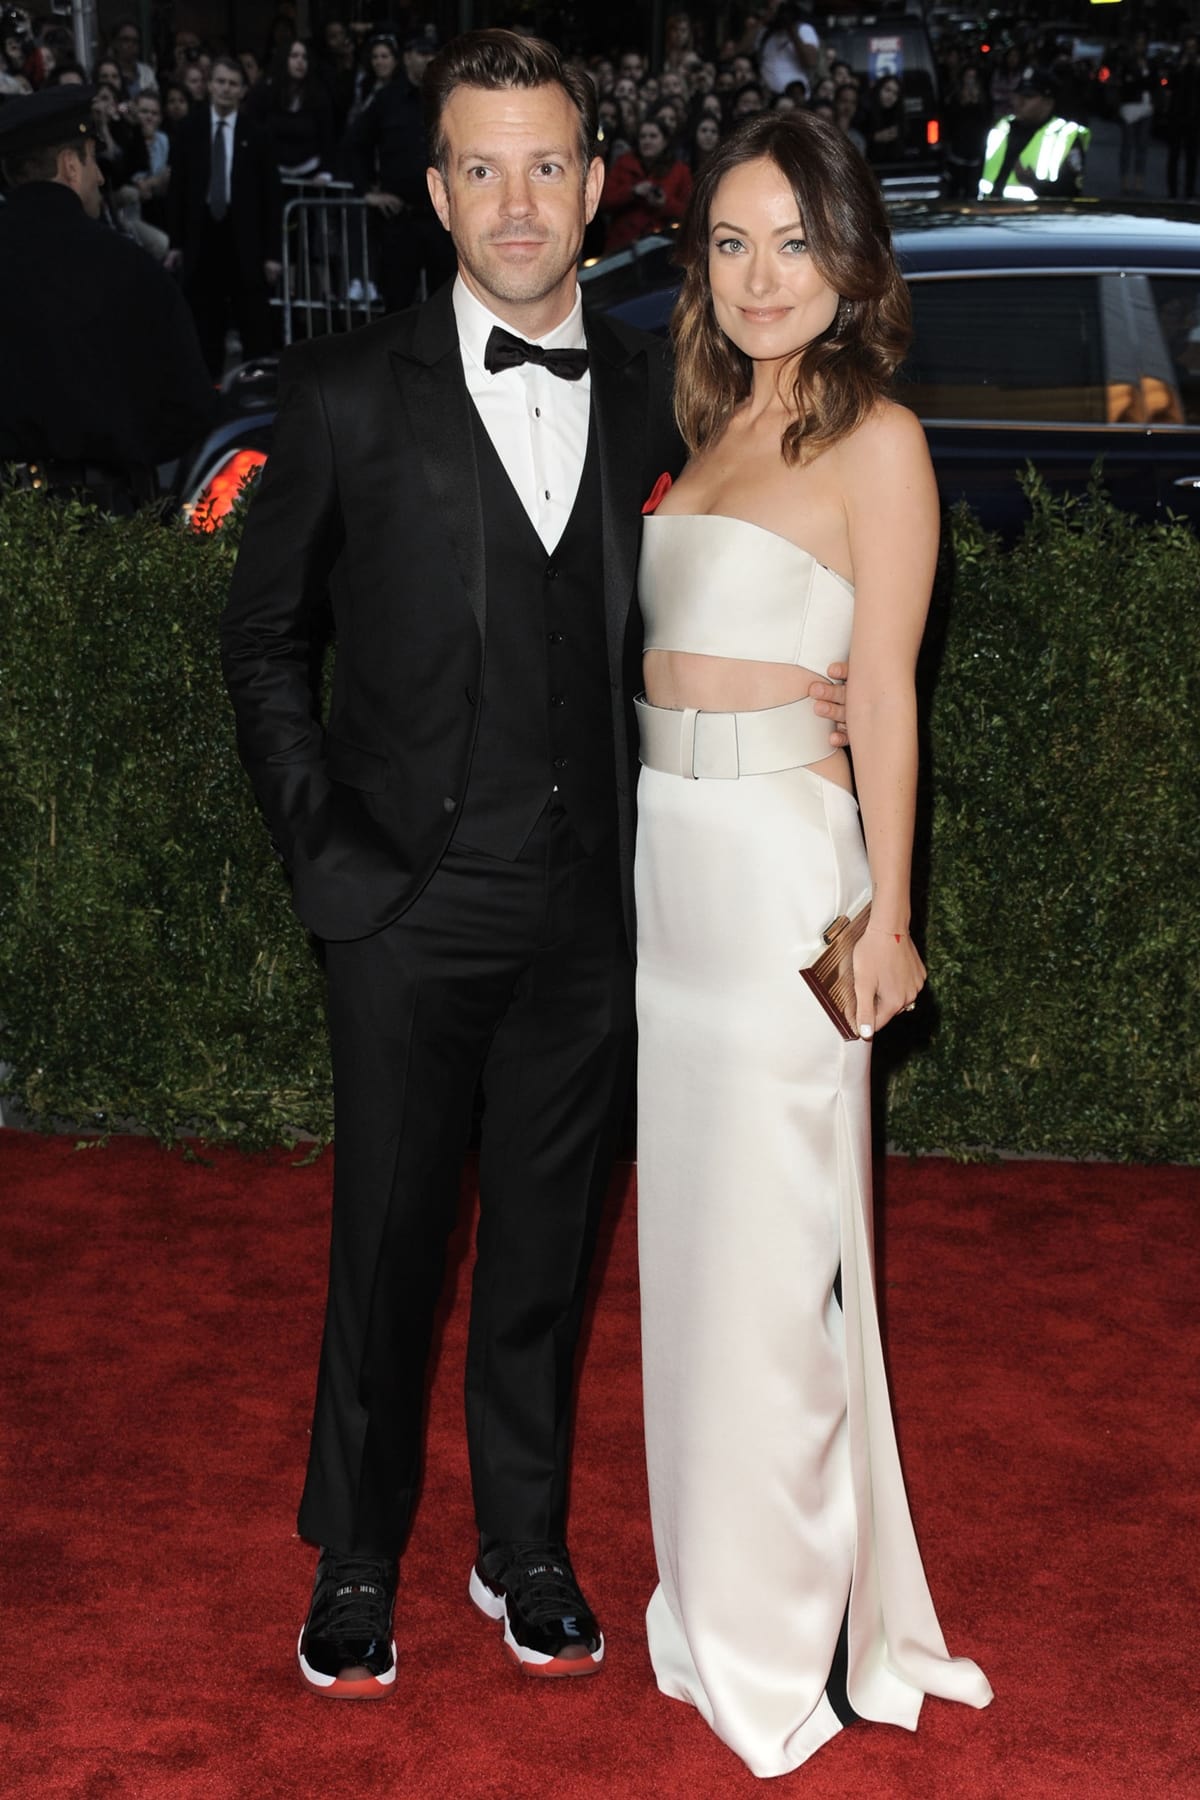 Jason Sudeikis and Olivia Wilde in a Calvin Klein Collection ivory satin dress at the Costume Institute Gala for the “PUNK: Chaos to Couture” exhibition held at the Metropolitan Museum of Art